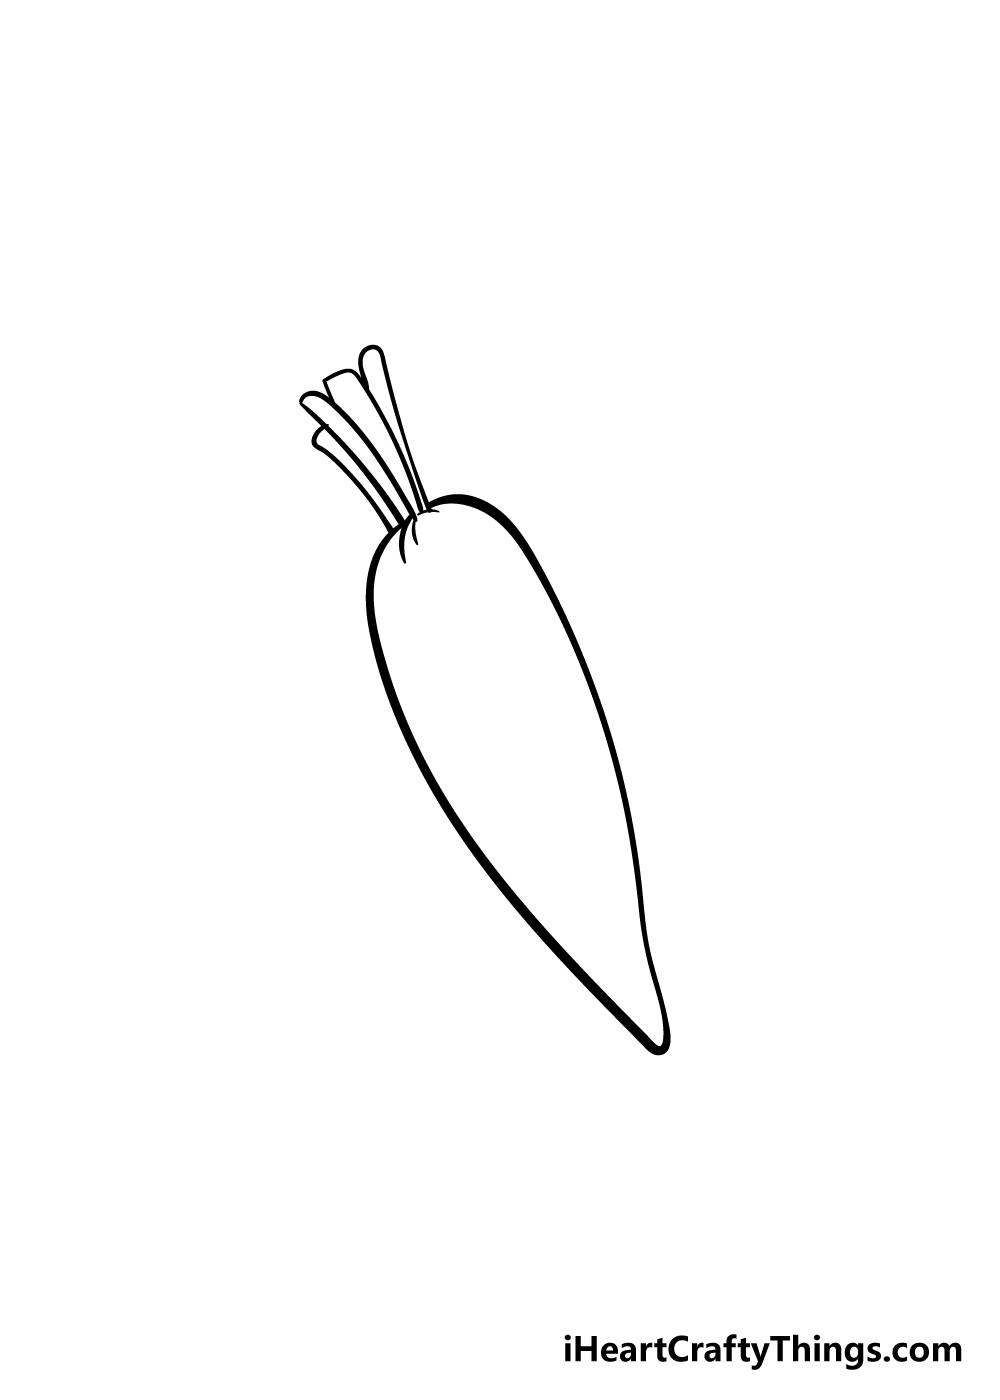 carrot drawing step 4